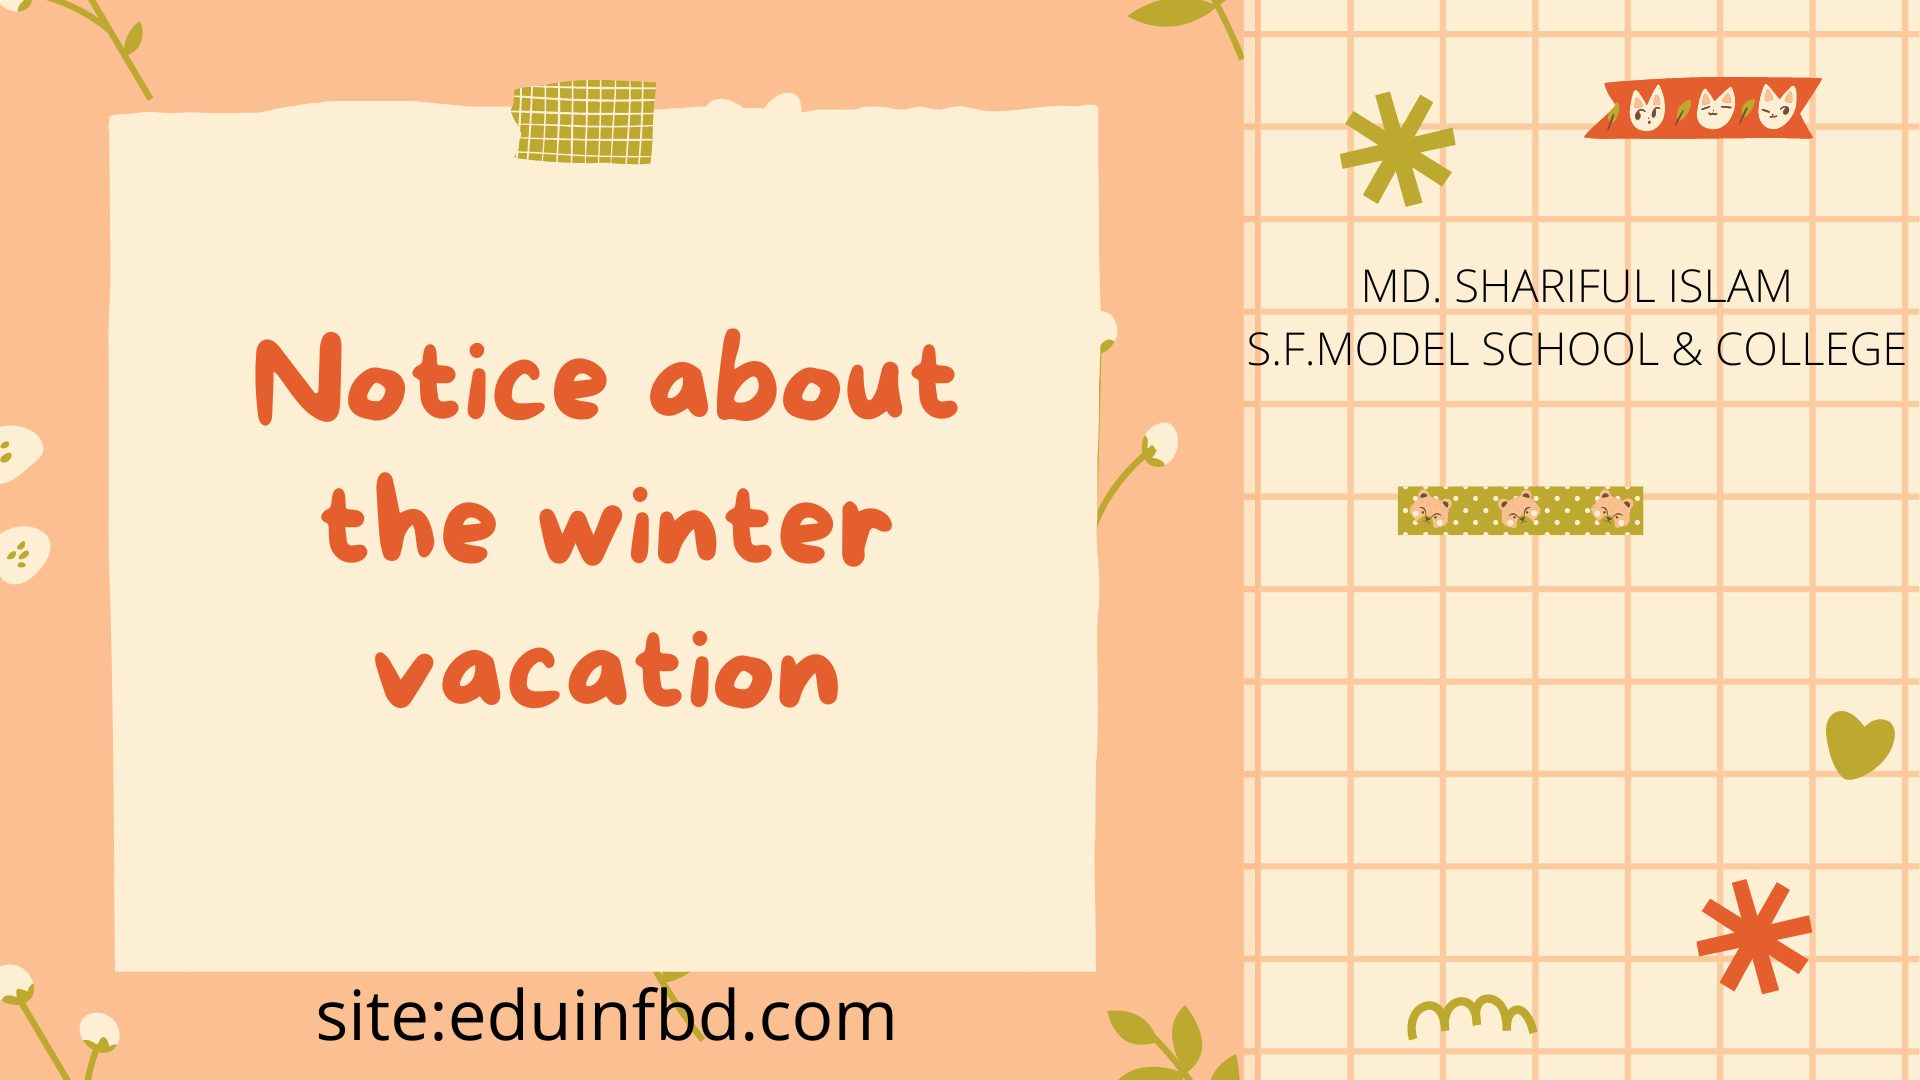 Notice about the winter vacation